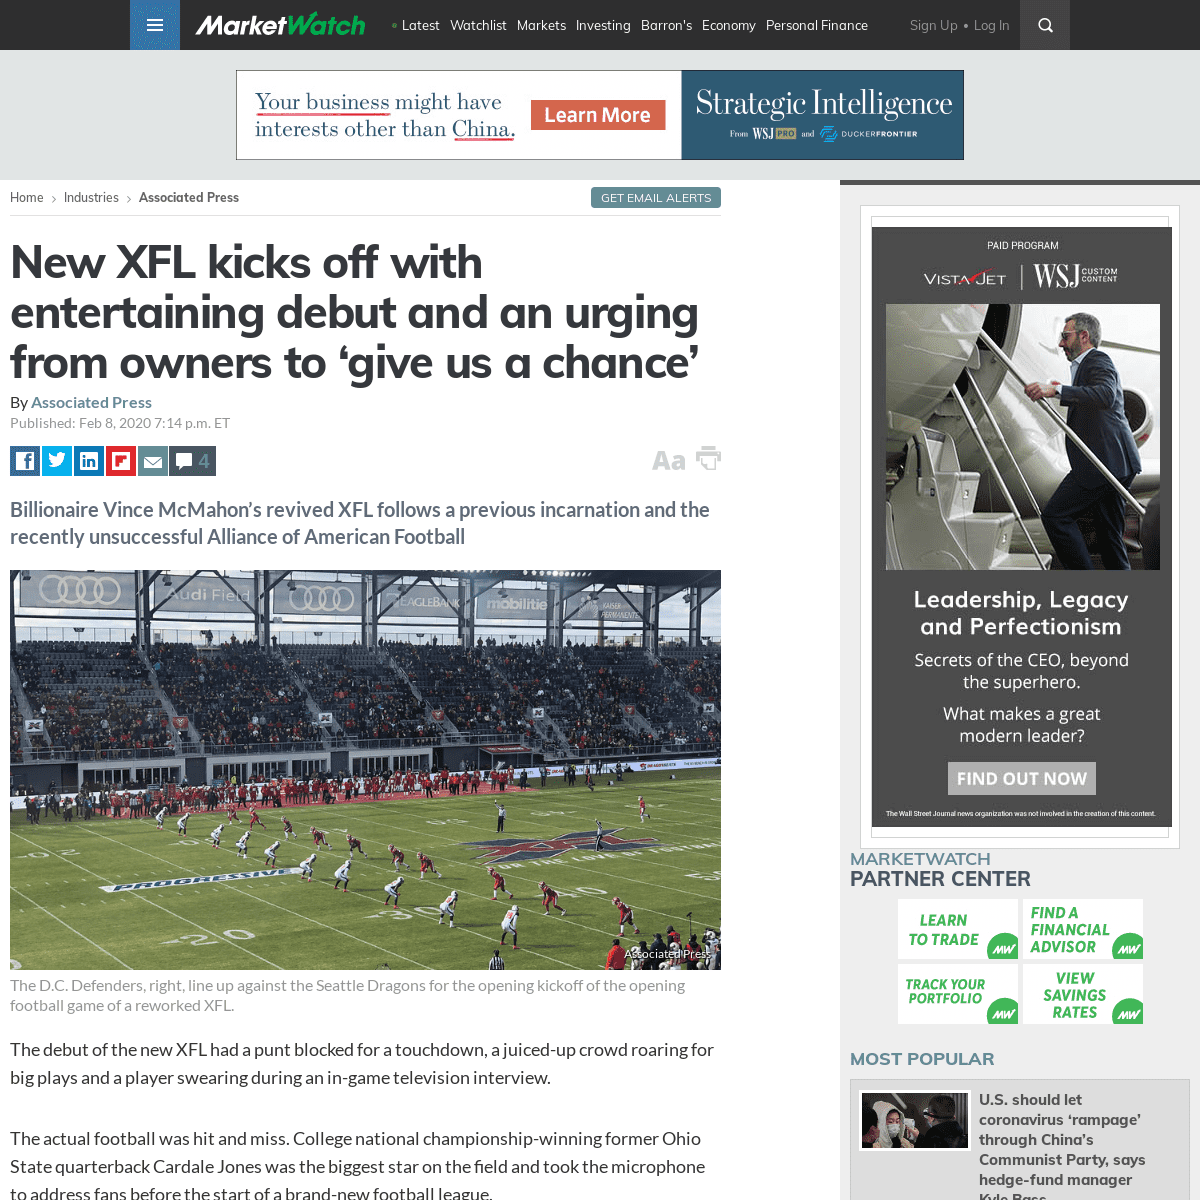 A complete backup of www.marketwatch.com/story/new-xfl-kicks-off-with-entertaining-debut-and-an-urging-from-owners-to-give-us-a-